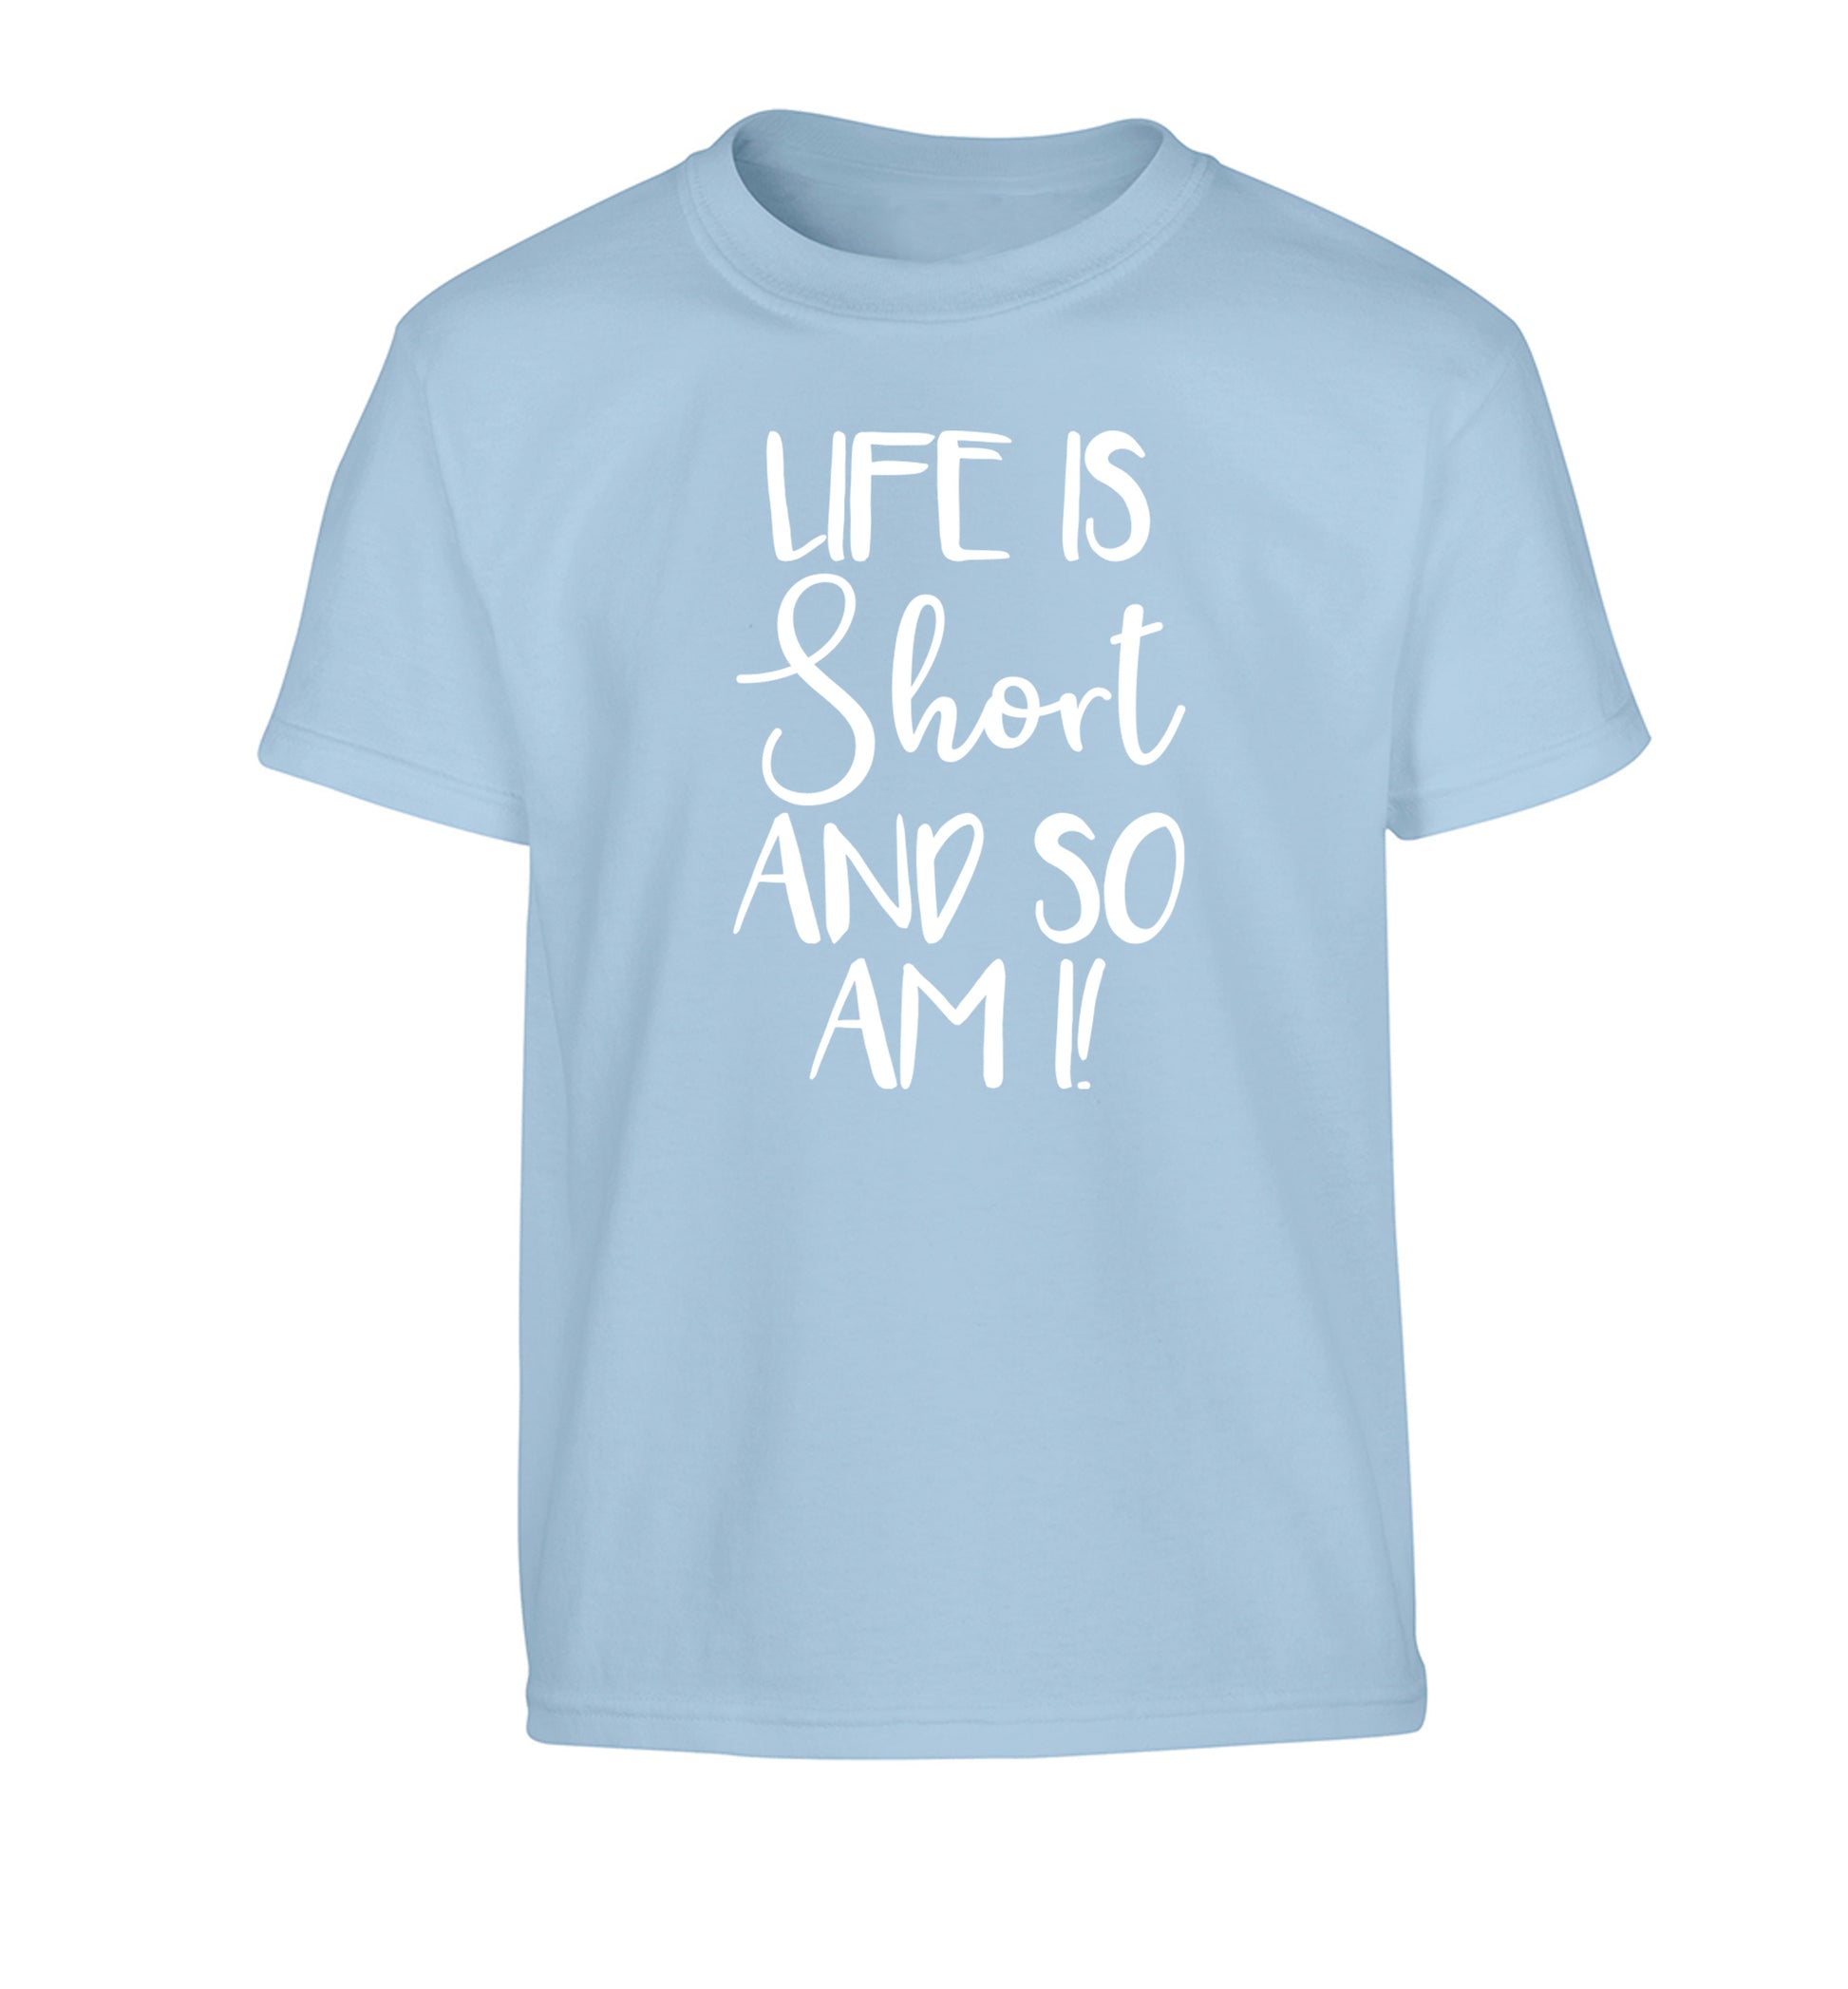 Life is short and so am I! Children's light blue Tshirt 12-13 Years